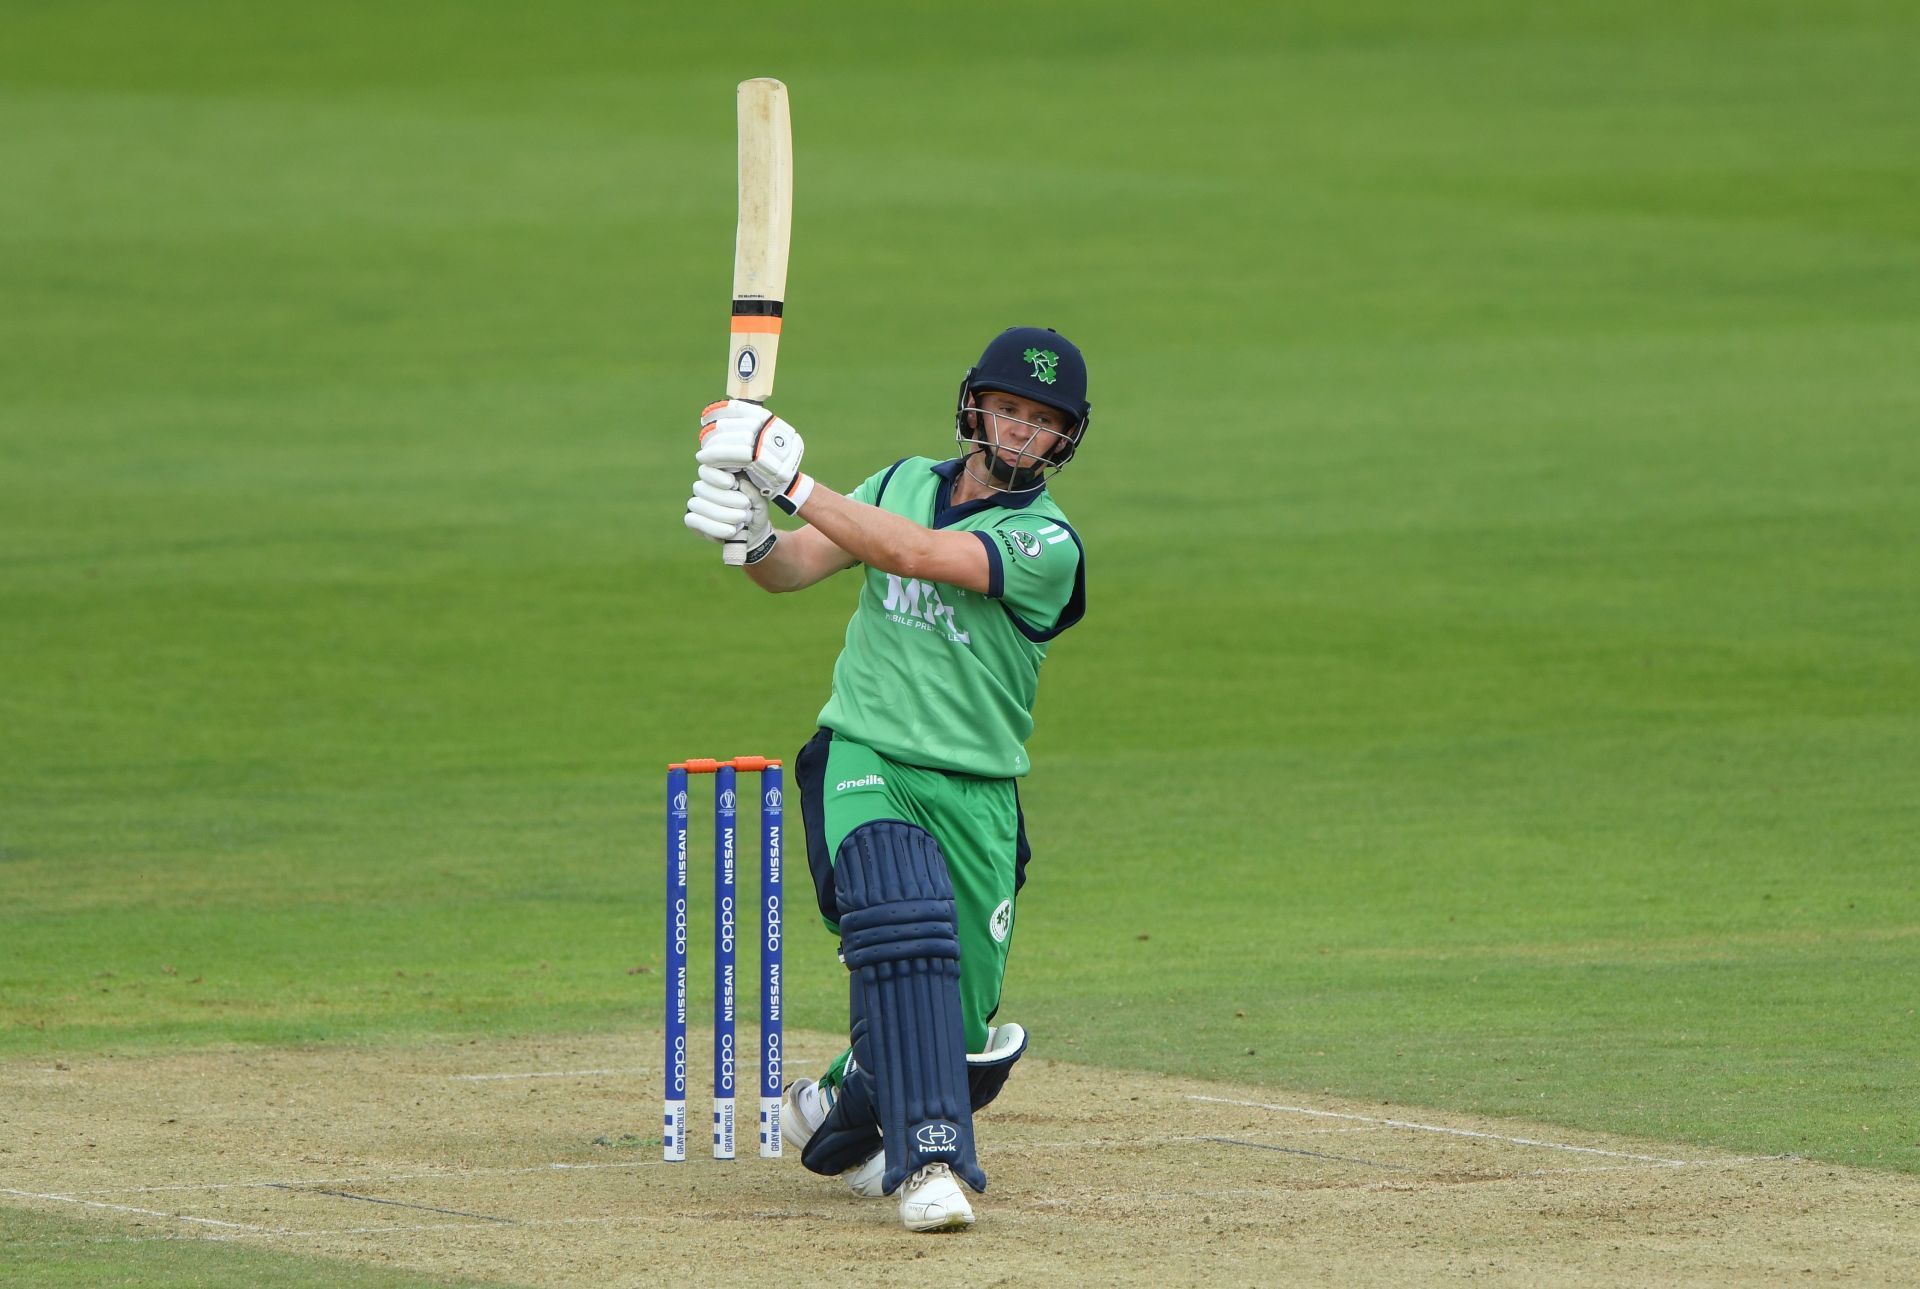 Ireland will take on USA in a series.